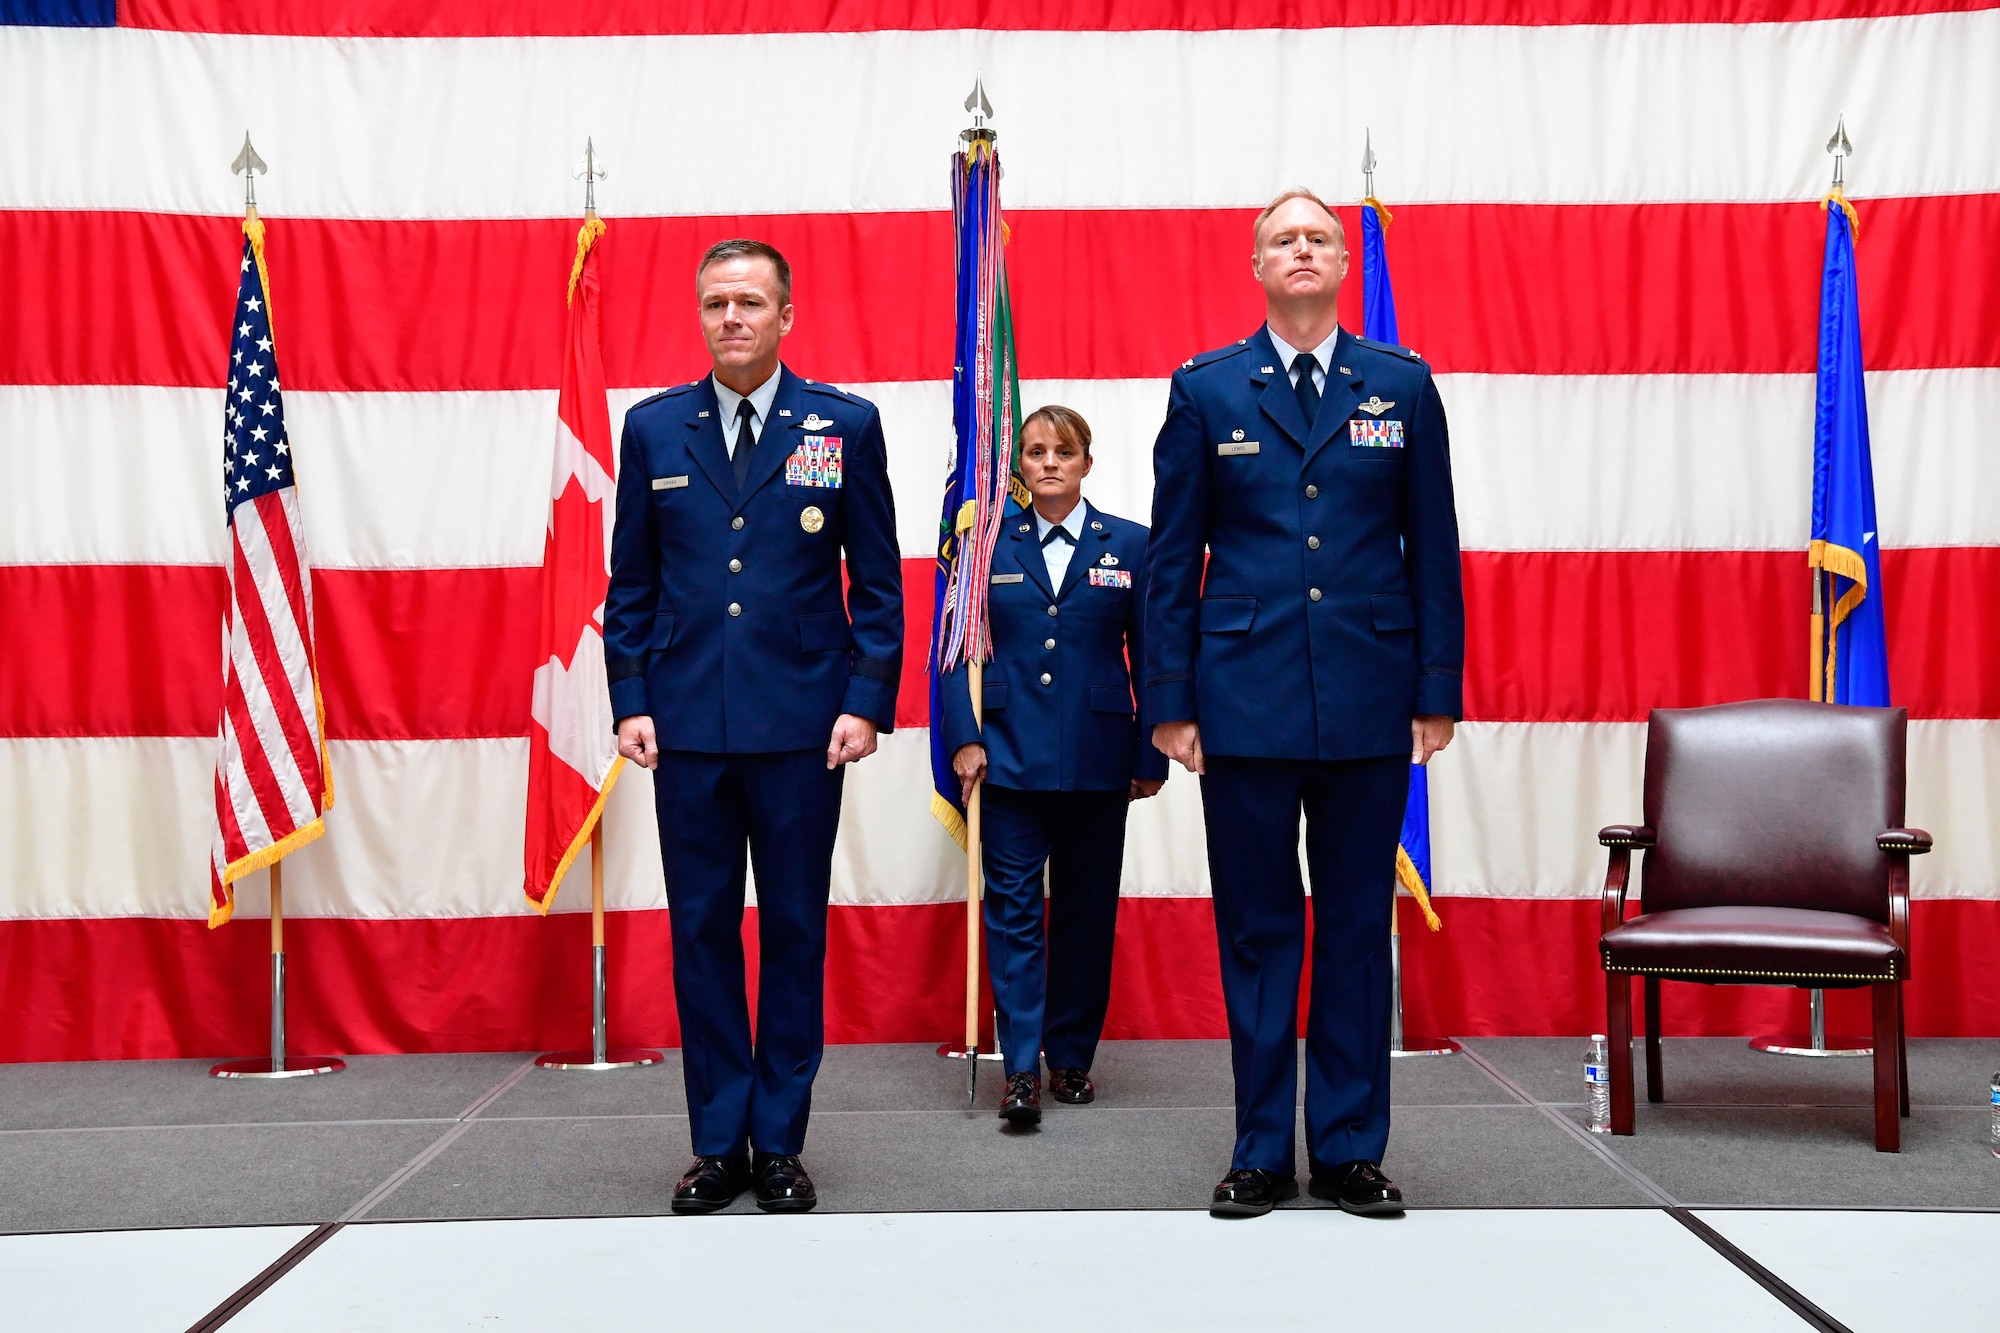 The Western Air Defense Sector first sergeant, Master Sgt. Mary Whitney, steps forward to present the unit colors to the WADS assumption of command presiding officer Brig. Gen. Kenneth Ekman (left), First Air Force and Air Force Northern Command vice commander.  Col.  Gregory Lewis (right) became the new commander of the Western Air Defense Sector July 31, 2018.